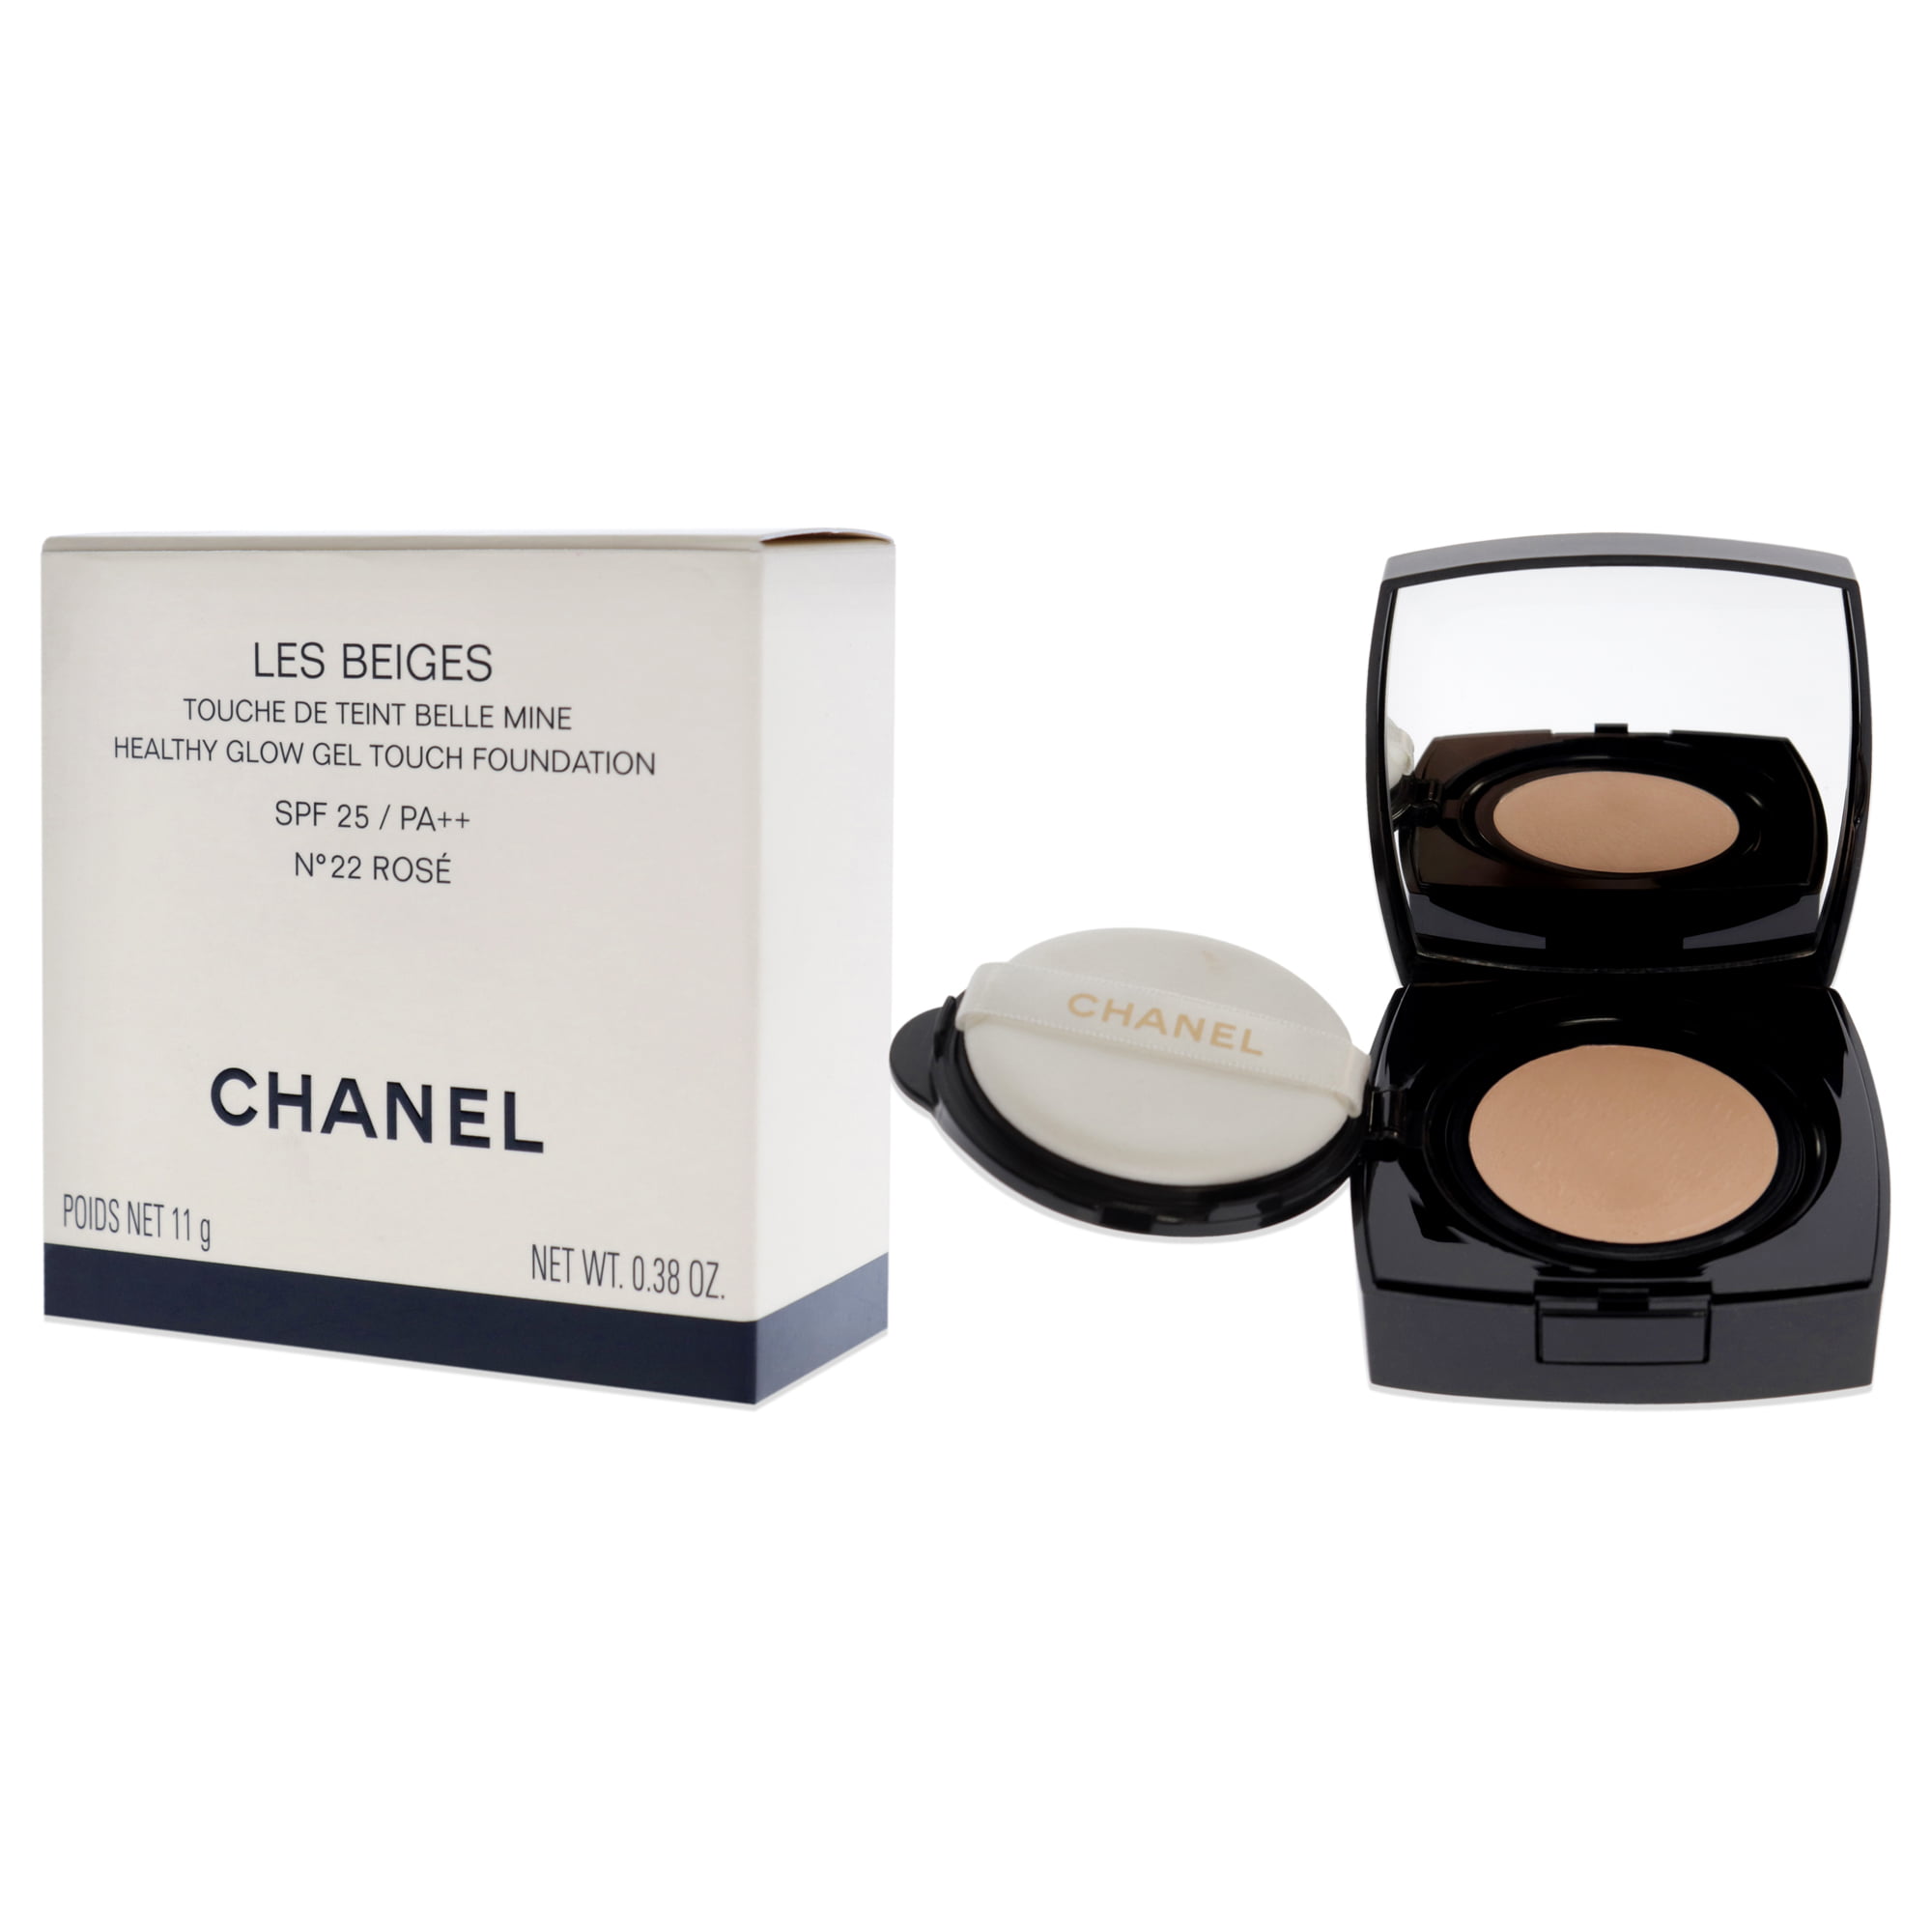 CHANEL LES BEIGES Healthy Glow Gel Touch Foundation SPF25 BD01 3ml (Trial  Size)